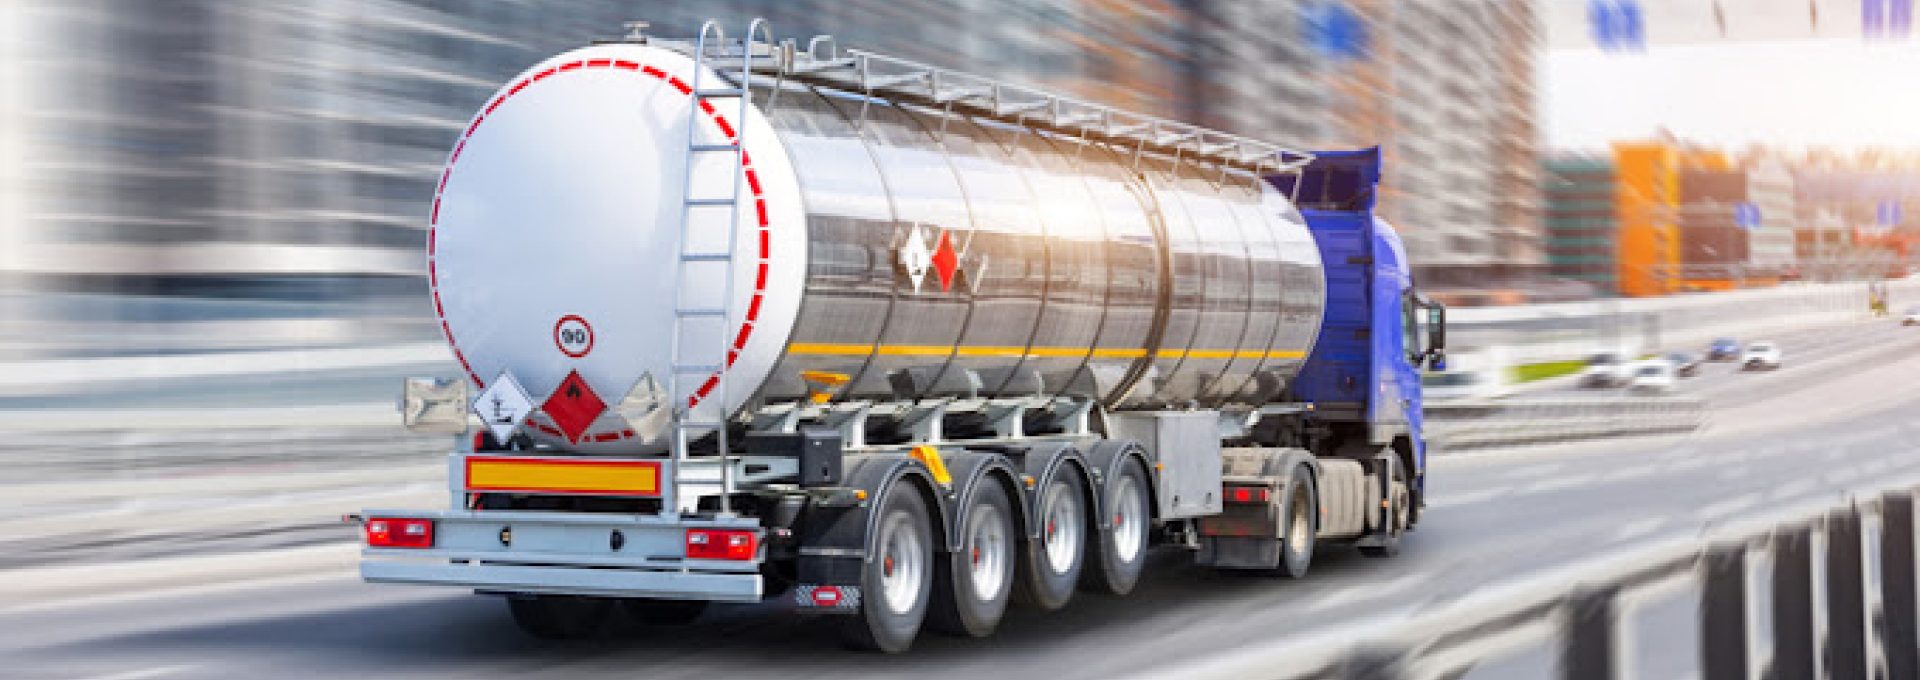 Commercial Motor Fuel Distributor in NJ - John Duffy Energy Services